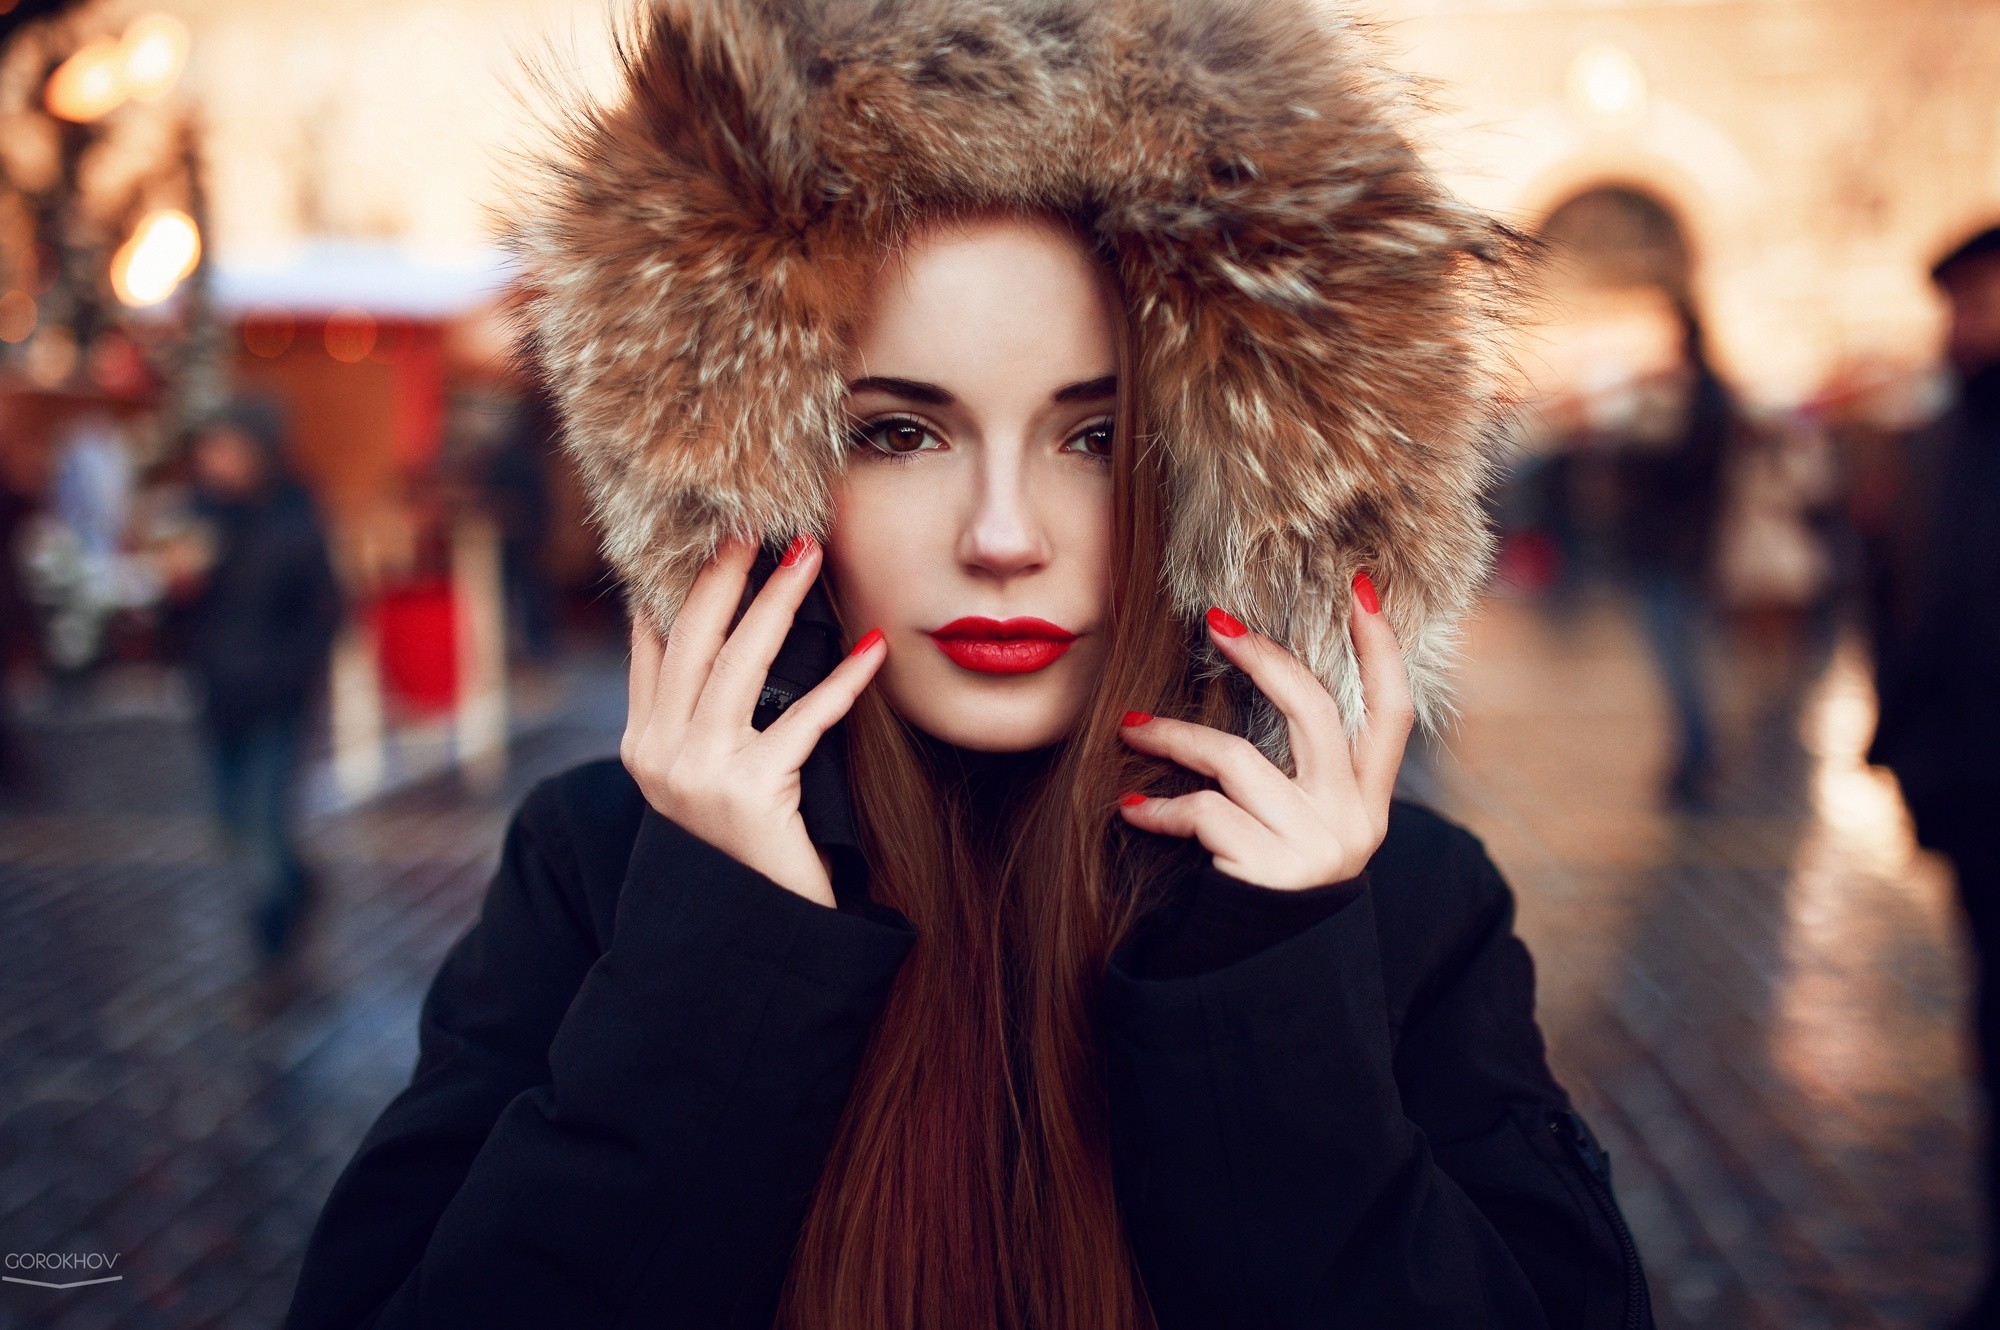 People 2000x1330 women model face red lipstick red nails fashion women outdoors airbrushed Sasha Spilberg Ivan Gorokhov coats black jackets brown eyes makeup closed mouth brunette 500px painted nails young women closeup watermarked